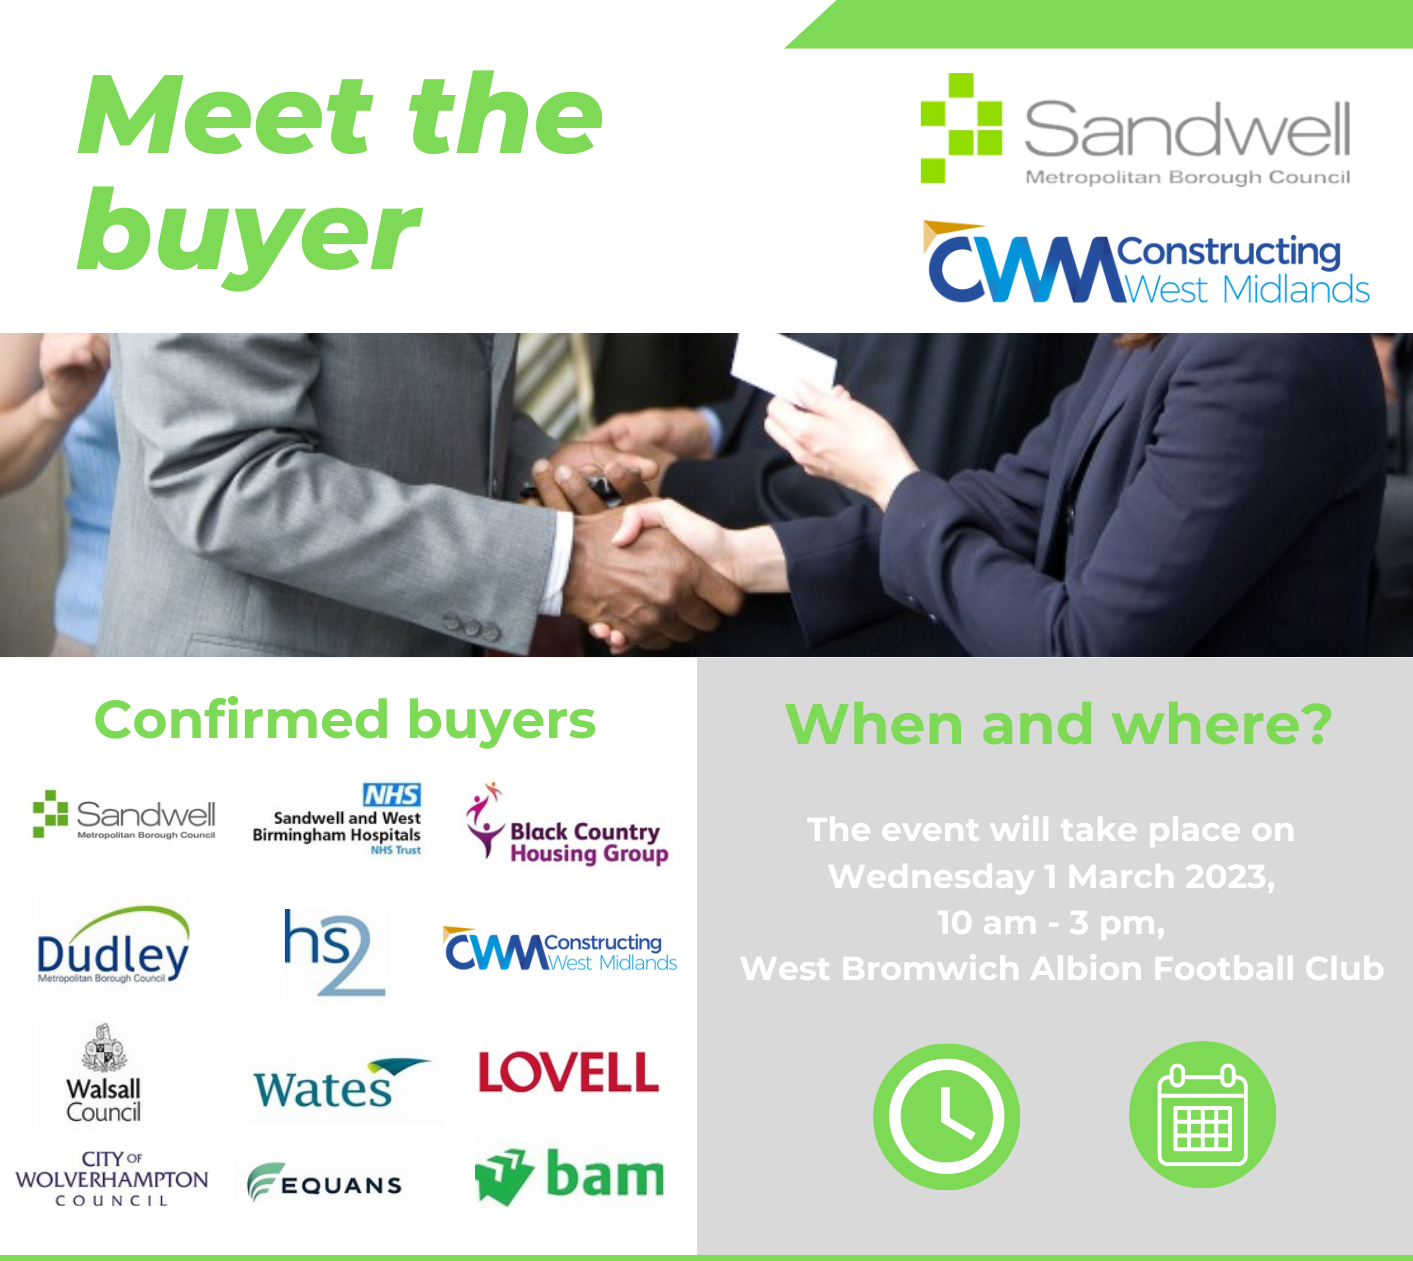 Meet the buyer: a close up of two people's hands shaking and exchanging business cards. Text: Meet the buyer, the event will take place on Wednesday 1 March 2023, 10am - 3pm, West Bromwich Albion Football Club